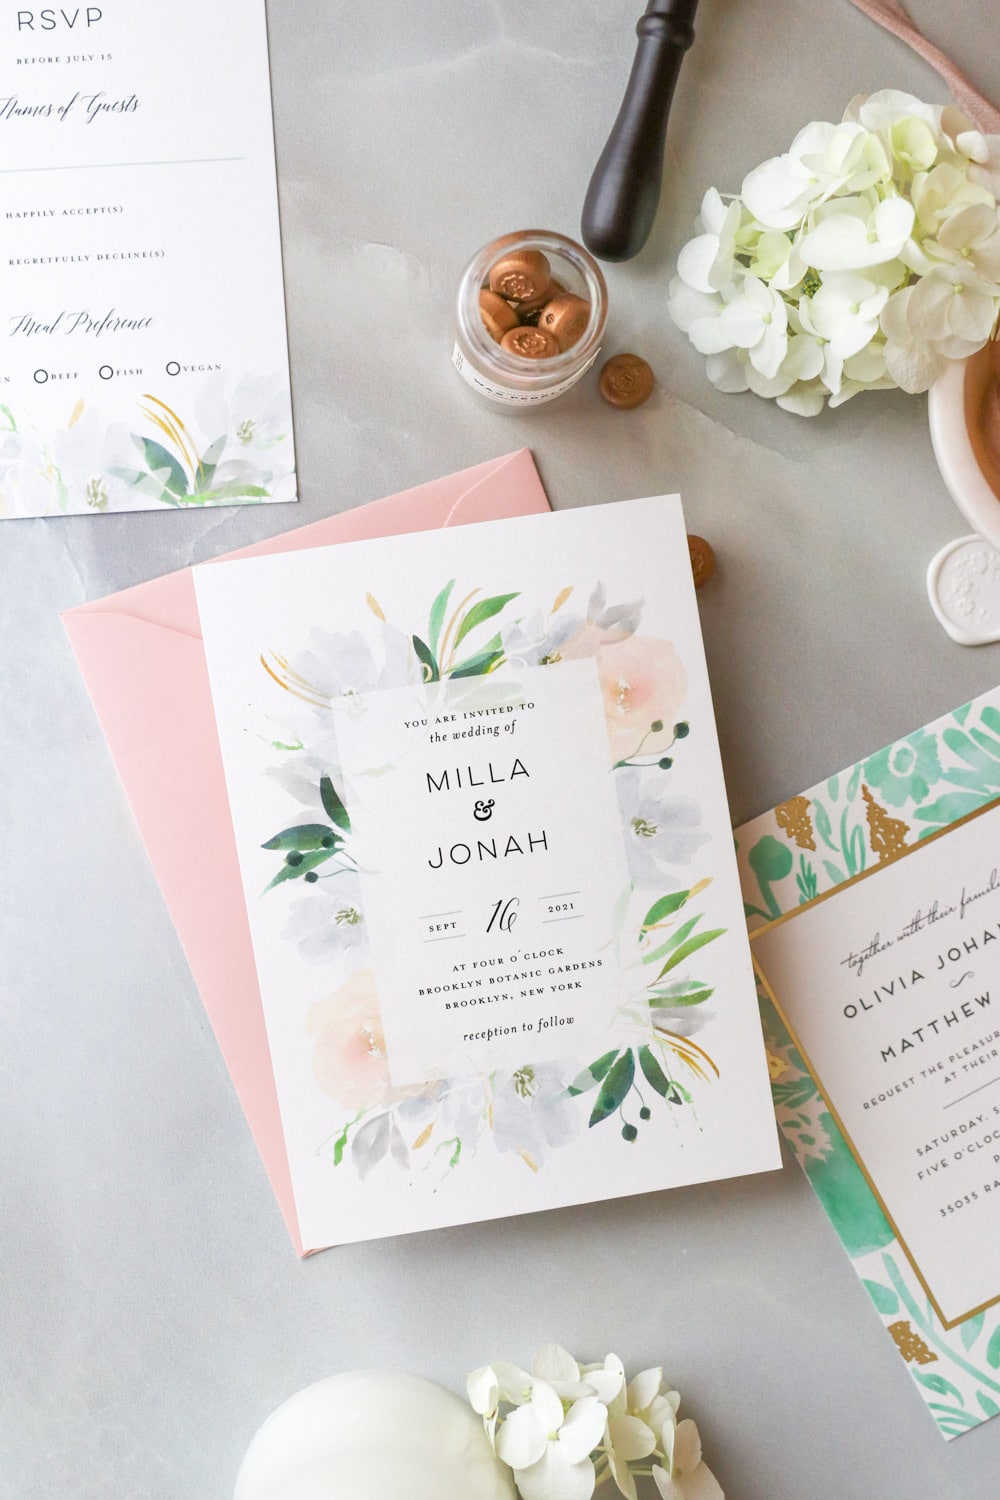 If you're hunting for wedding invitations, chances are you've heard of Minted. We have too (turns out they're actually one of our top competitors). Here's our 100% honest review of Minted Wedding Invitations--and it's not what you think | Pipkin Paper Company